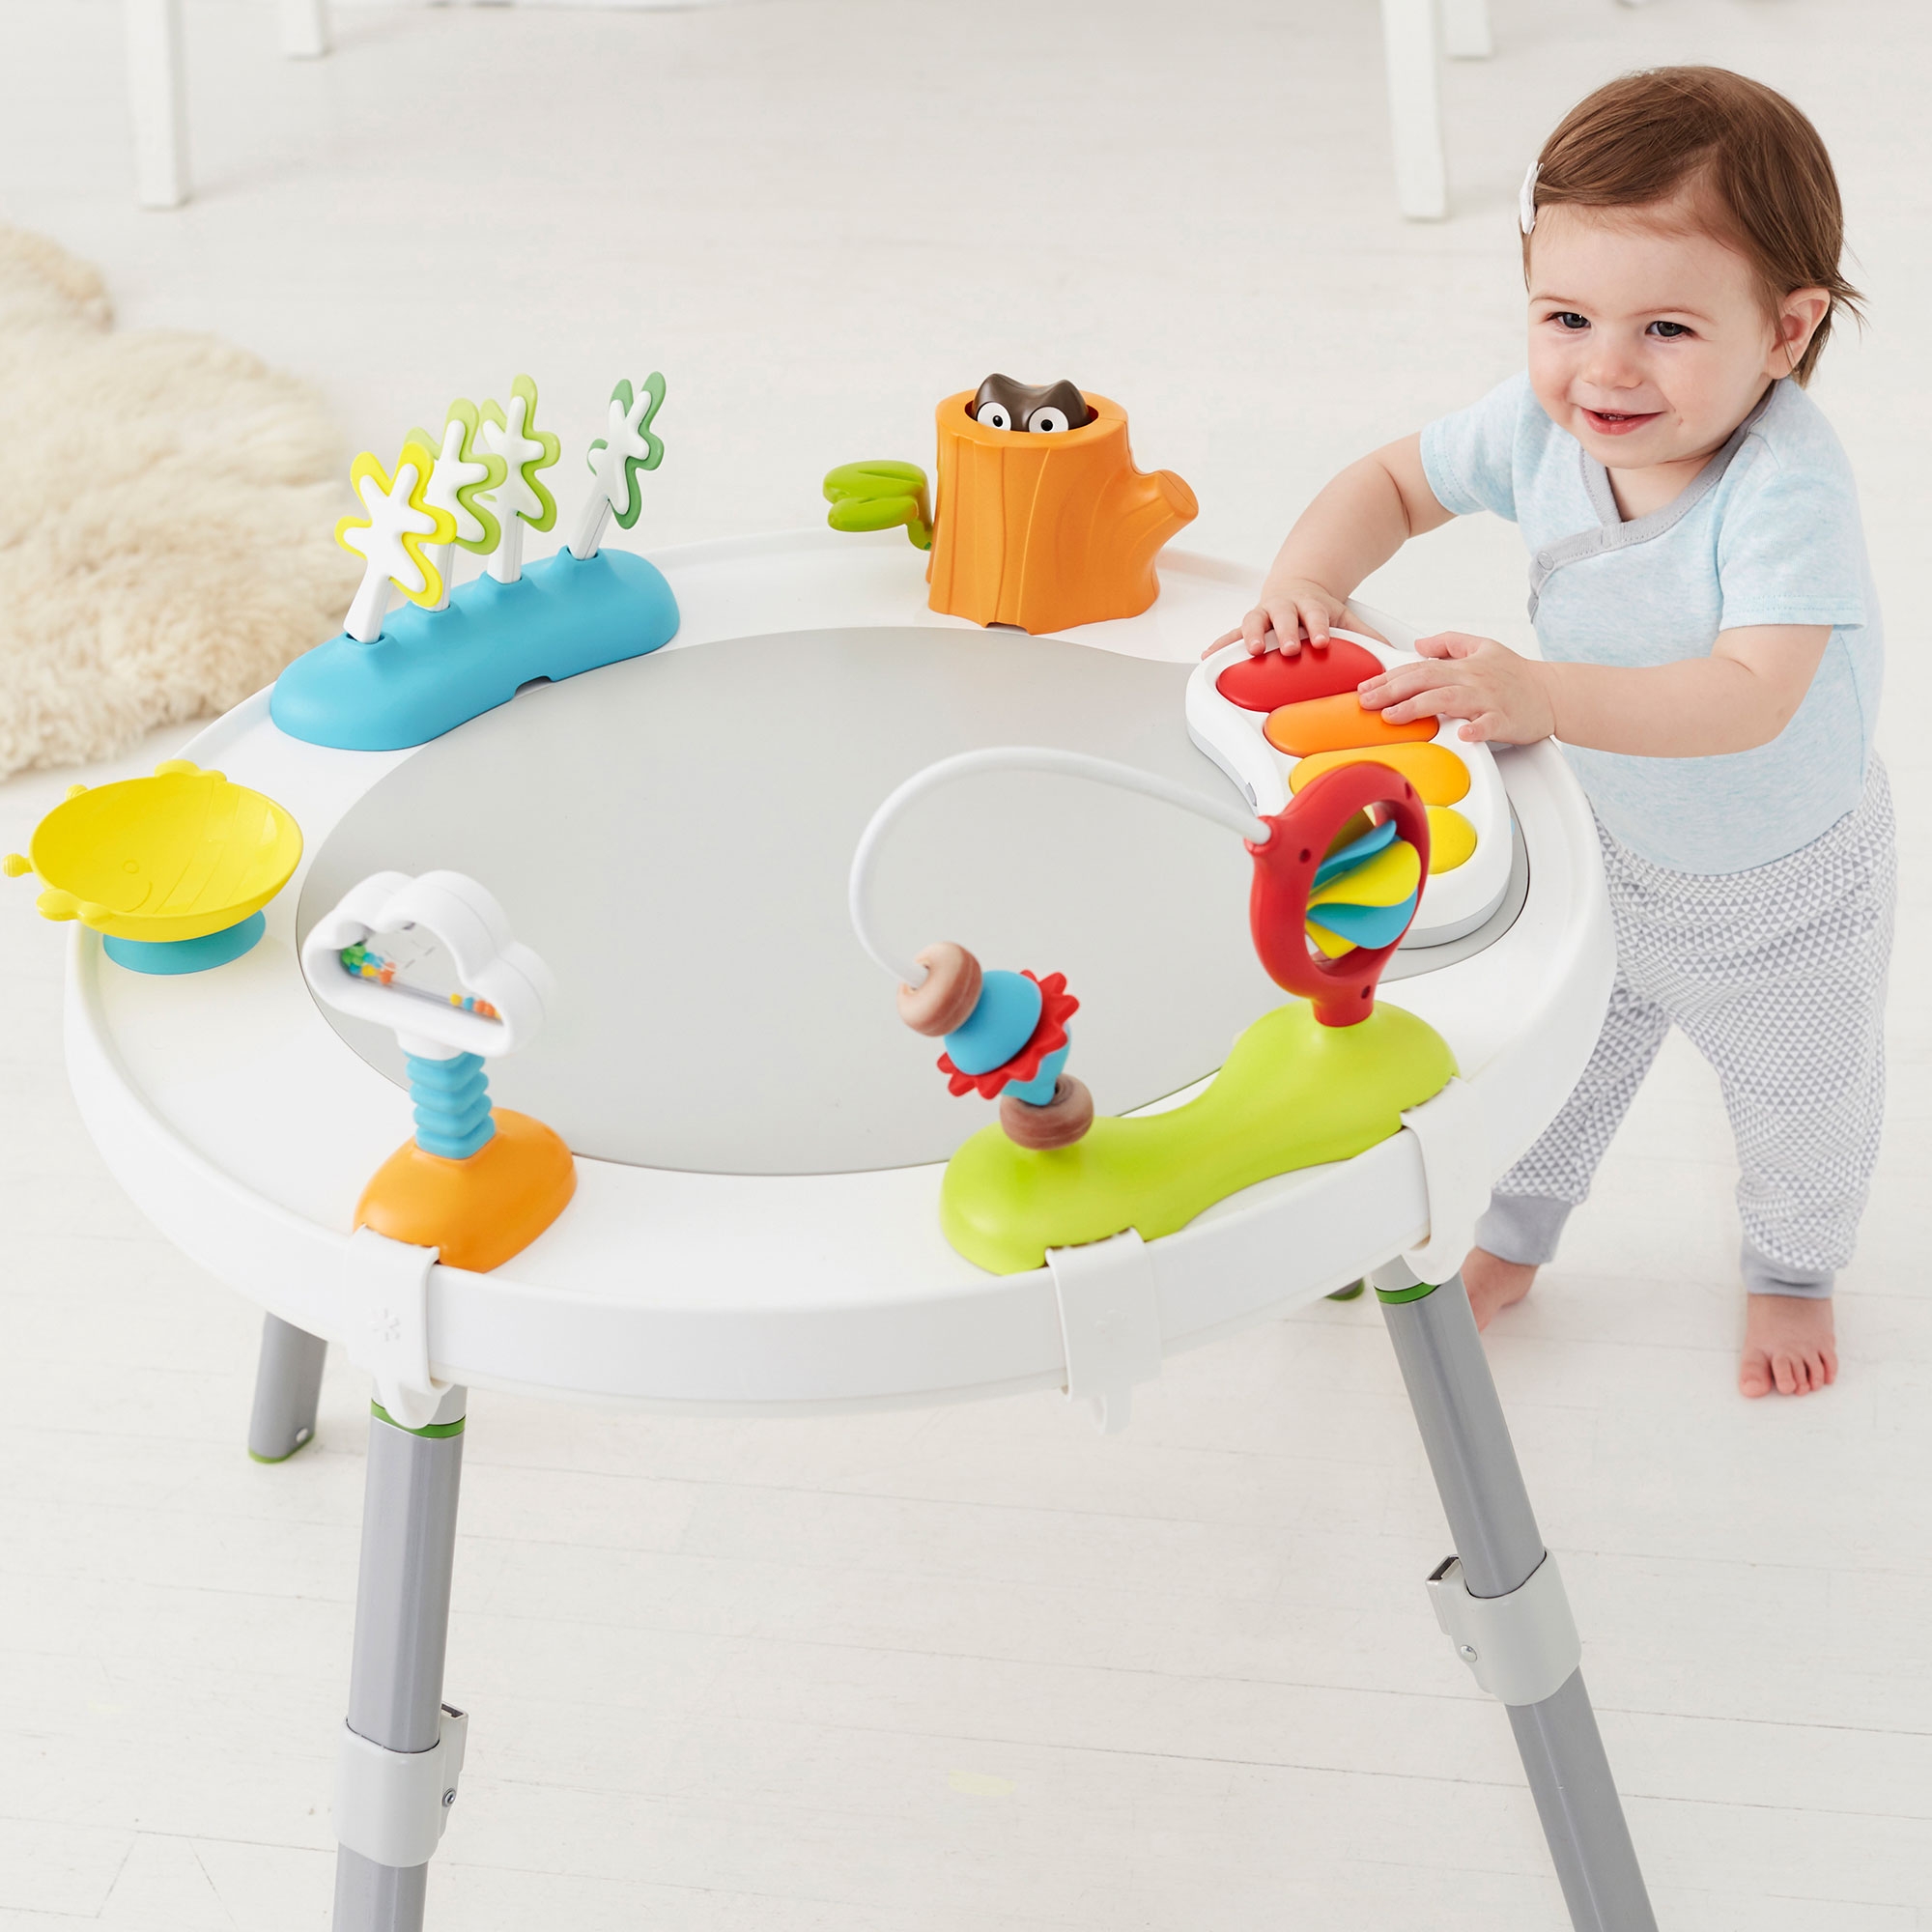 skip and hop activity center